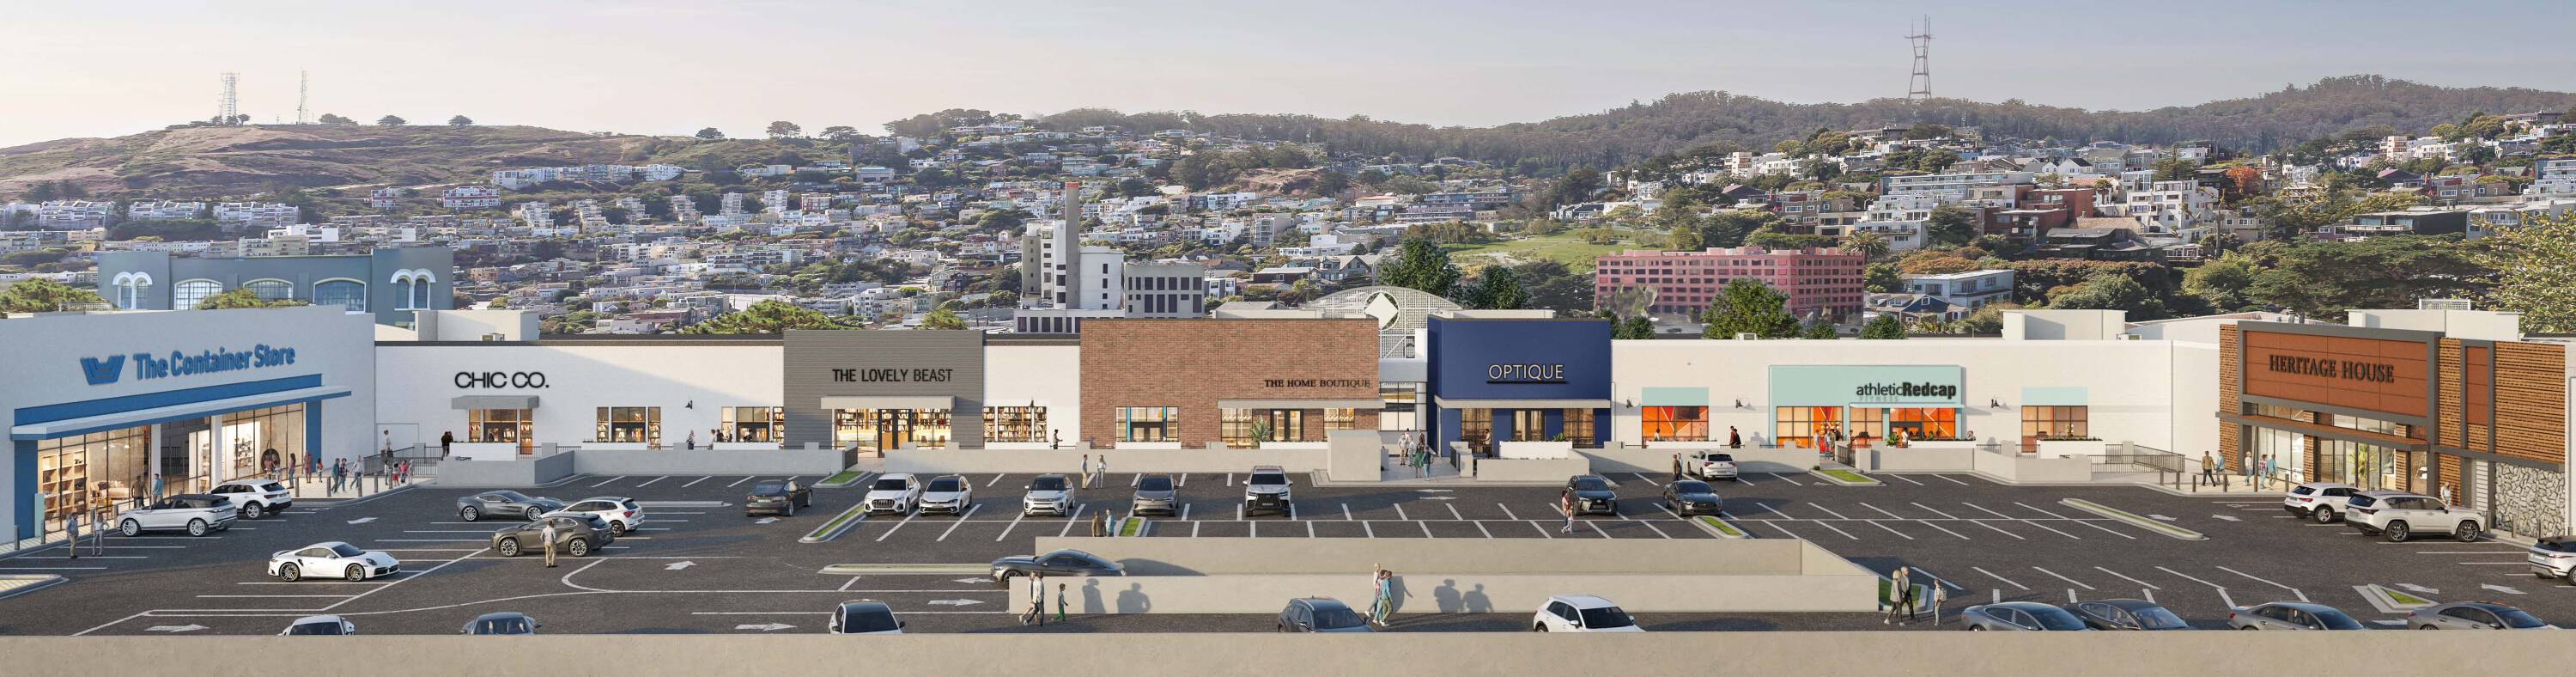 Container Store Proposed for 555 9th Street, San Francisco - San